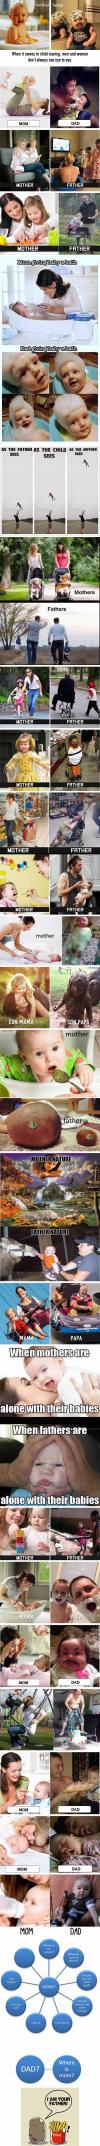 the difference between mothers and fathers as told by their kids